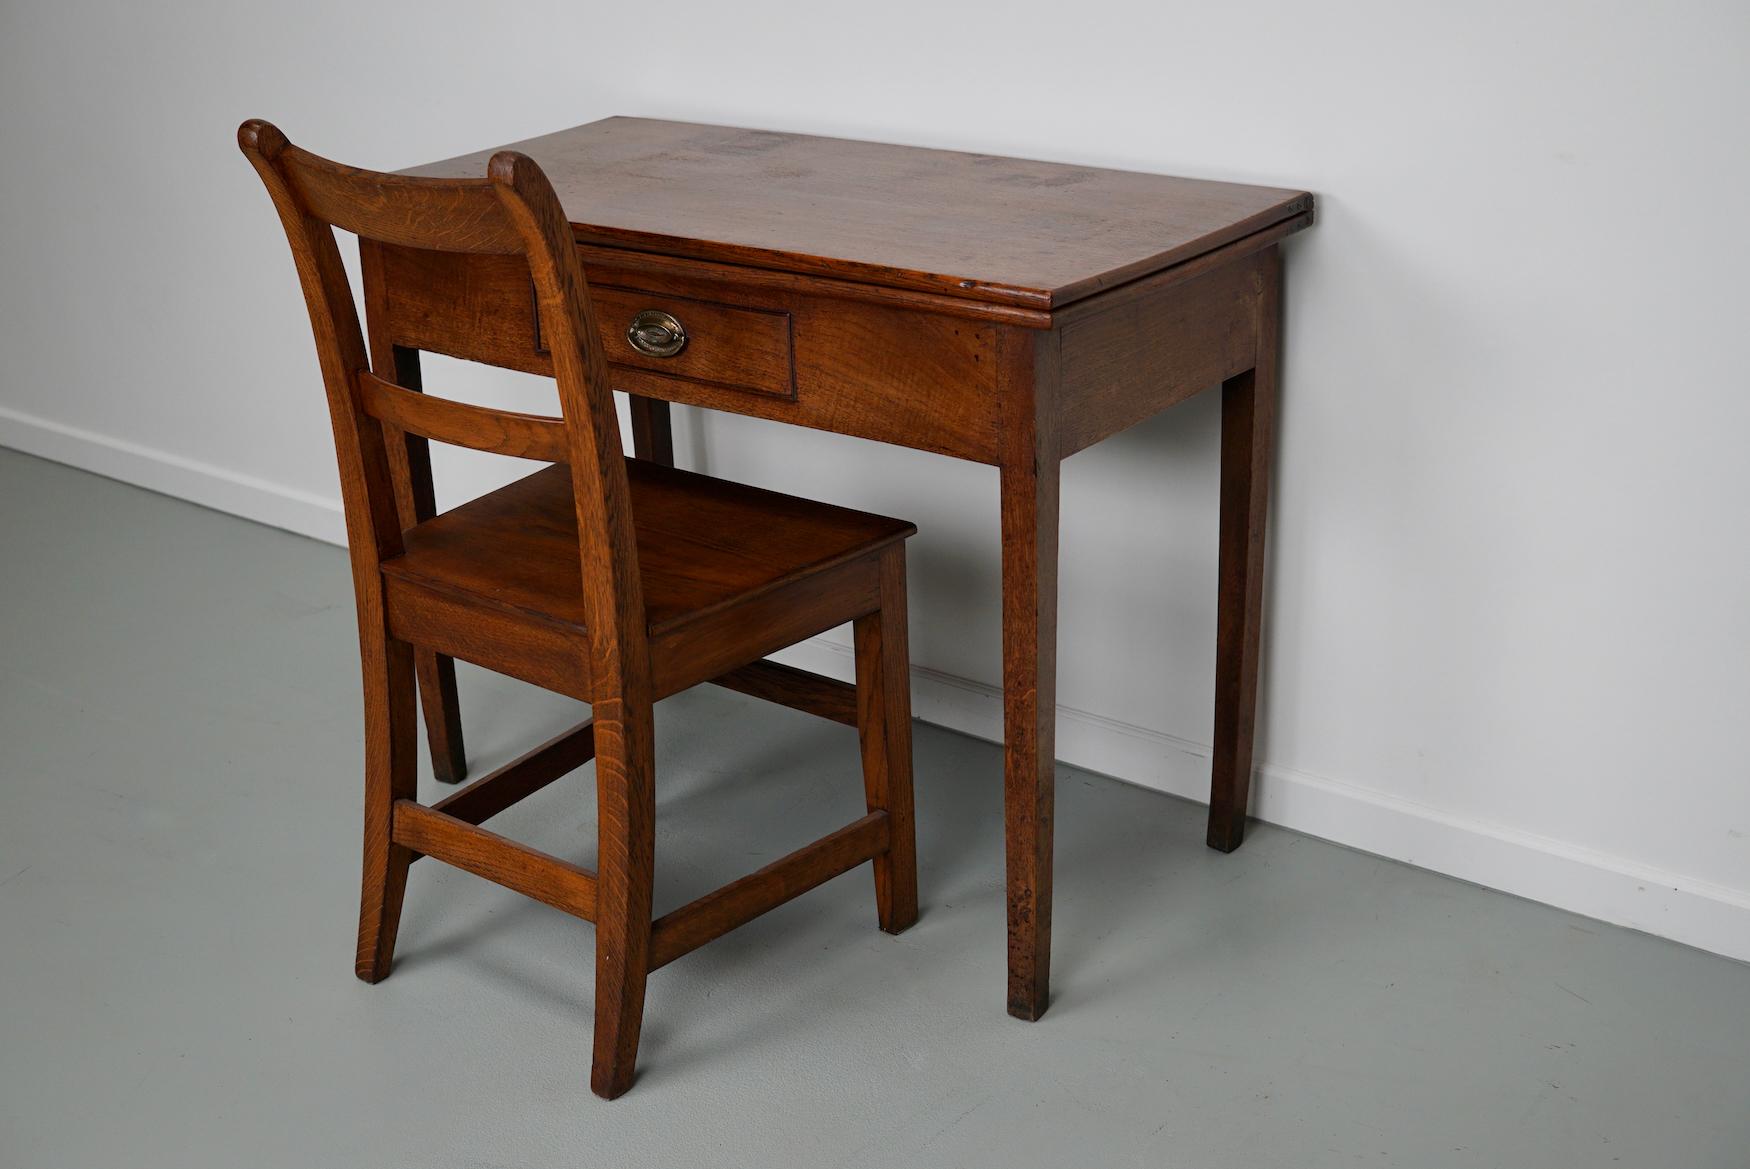 This writing table was designed and made in England around 1800. It can be folded into a large square table. It comes with a nice antique oak chair that has the same color / finish.